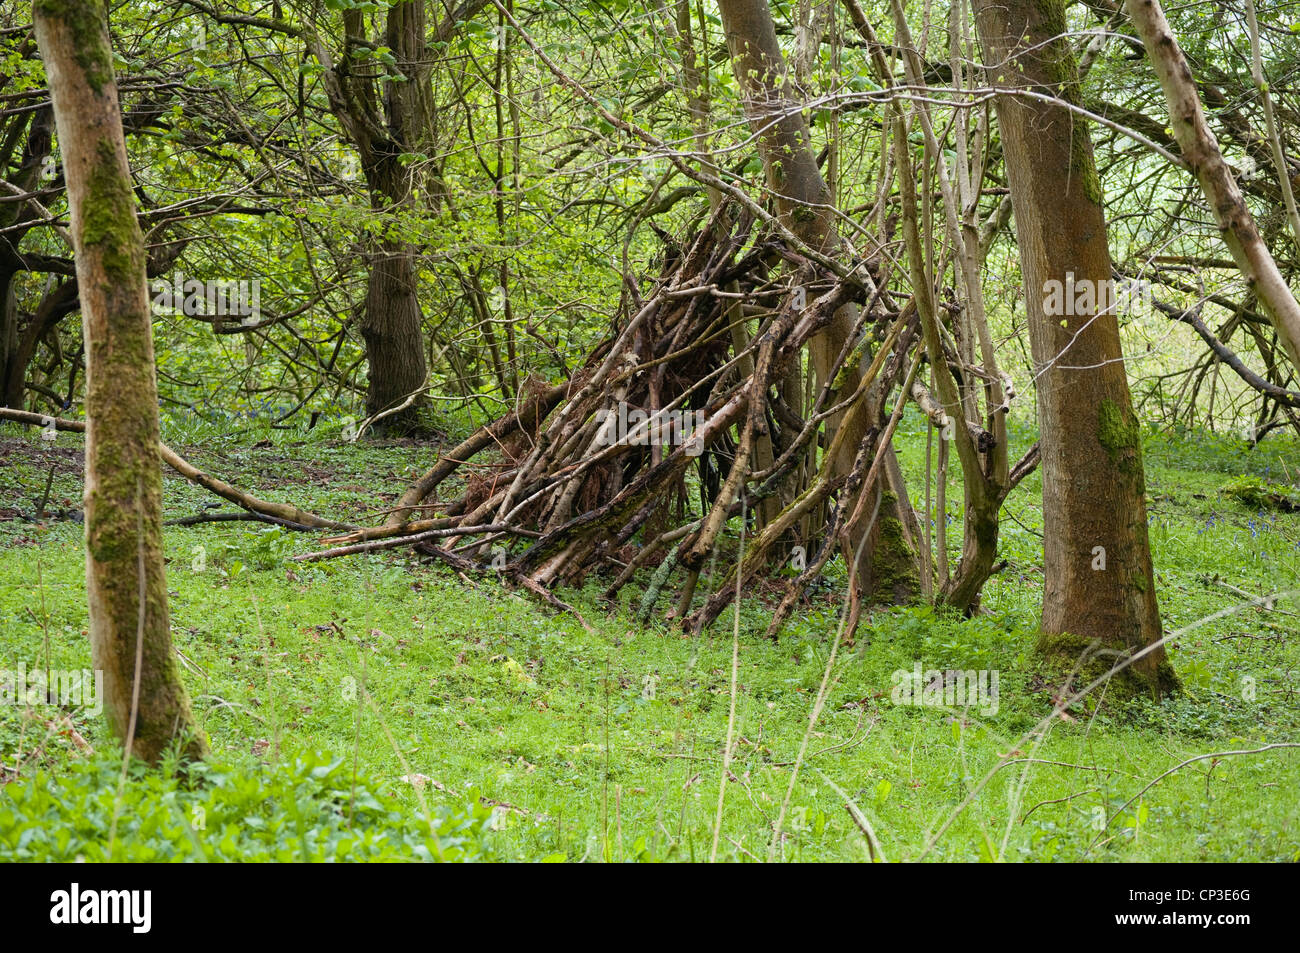 An Alder wood, (Alnus glutinosa) with coppiced branches forming a den or shelter, at Southam, Gloucestershire, UK. Stock Photo